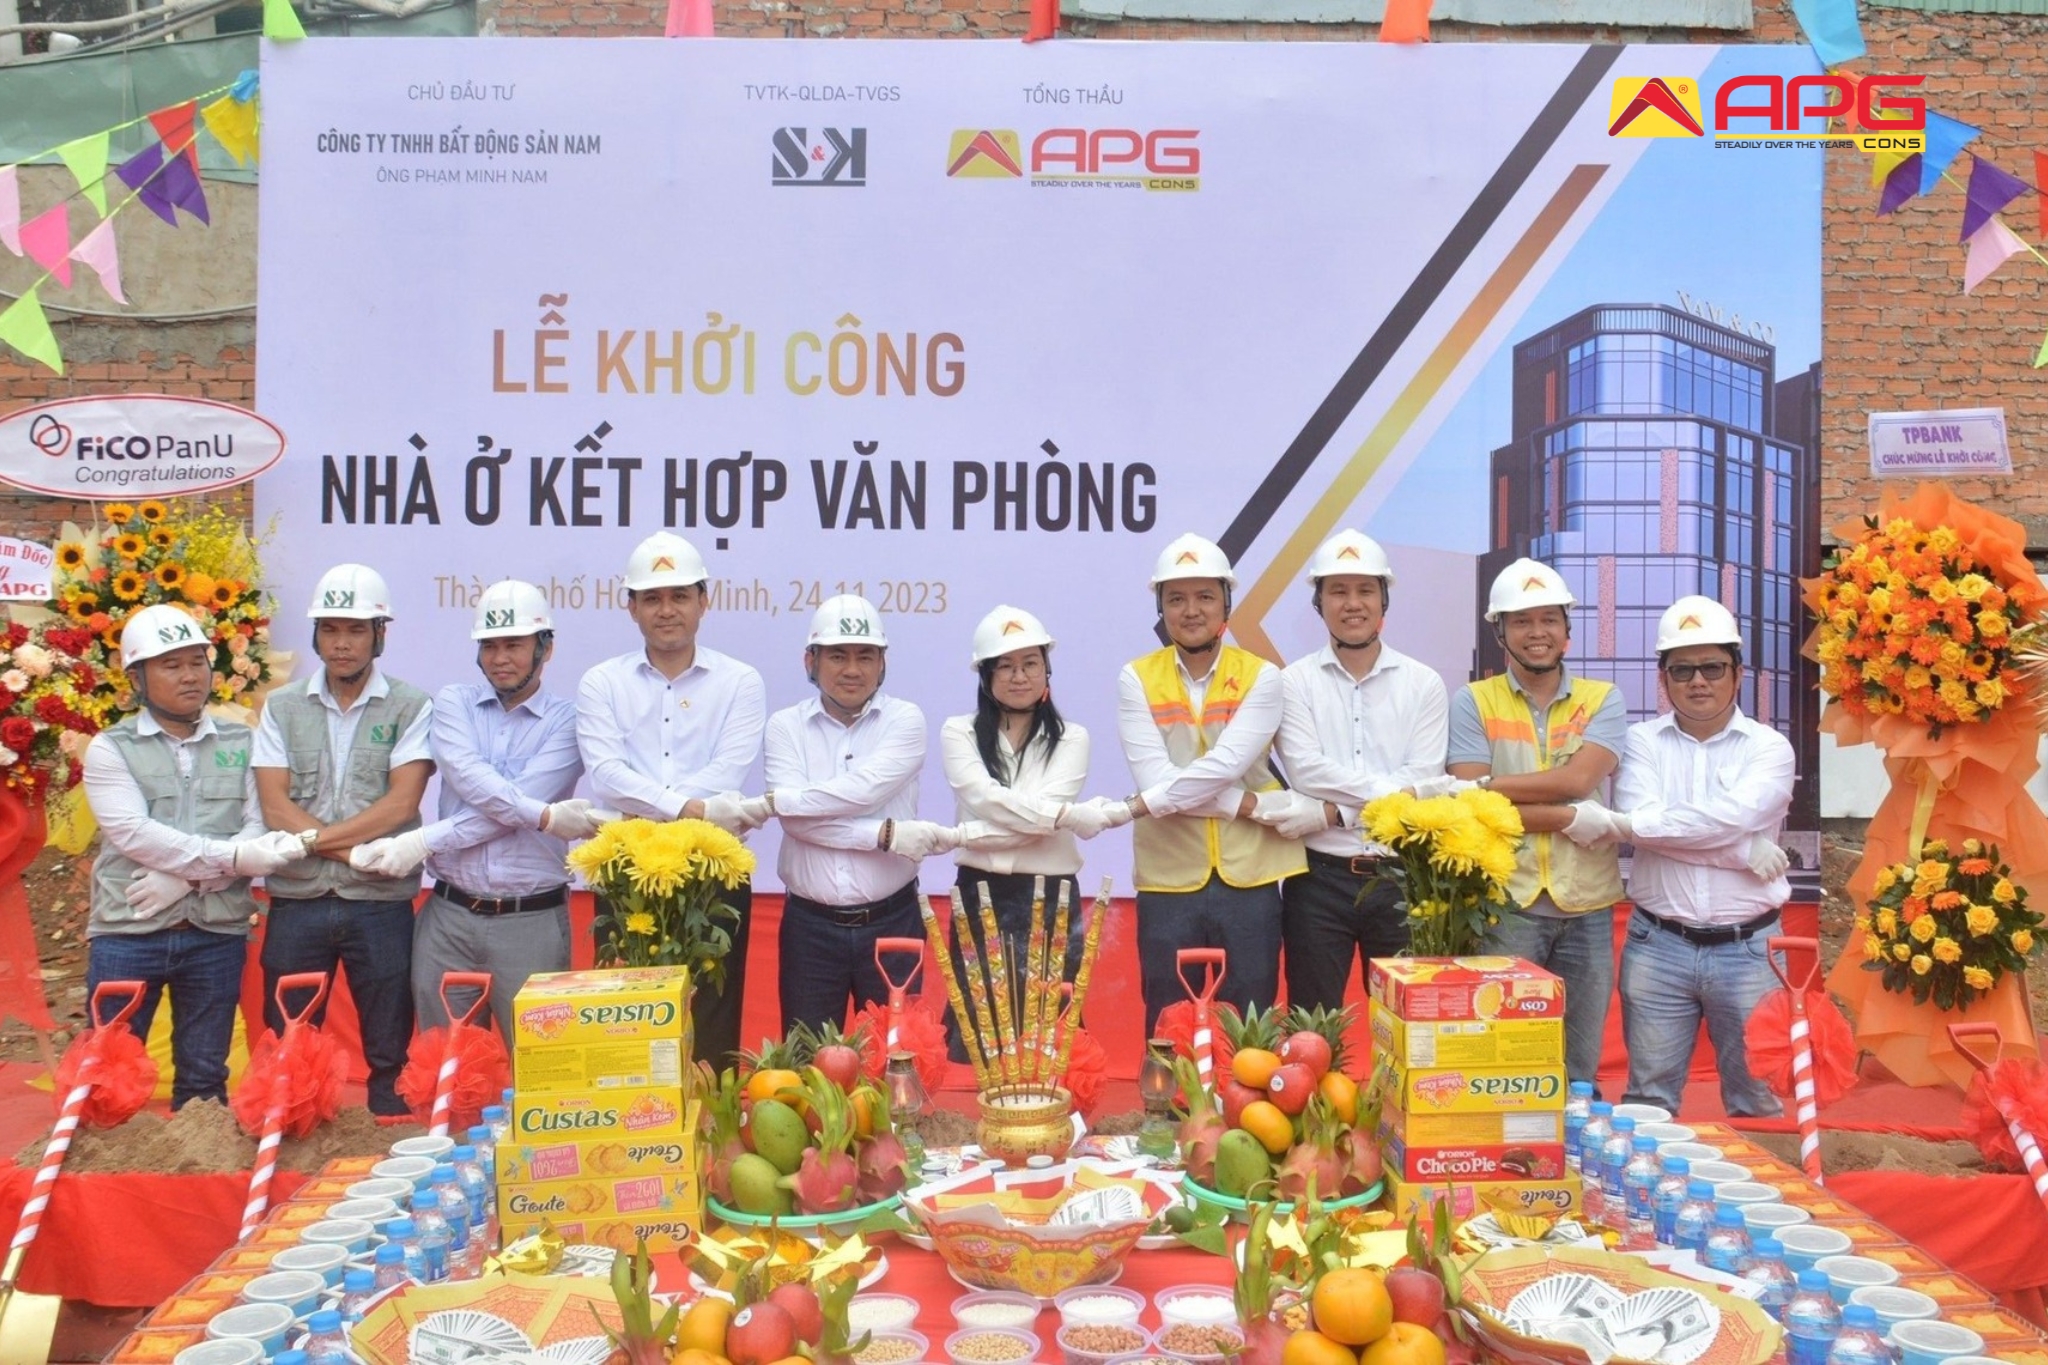 AN PHU GIA CONSTRUCTION STARTED CONSTRUCTION OF THE HOUSING AND OFFICE PROJECT AT 28 PHAN DINH GIOT